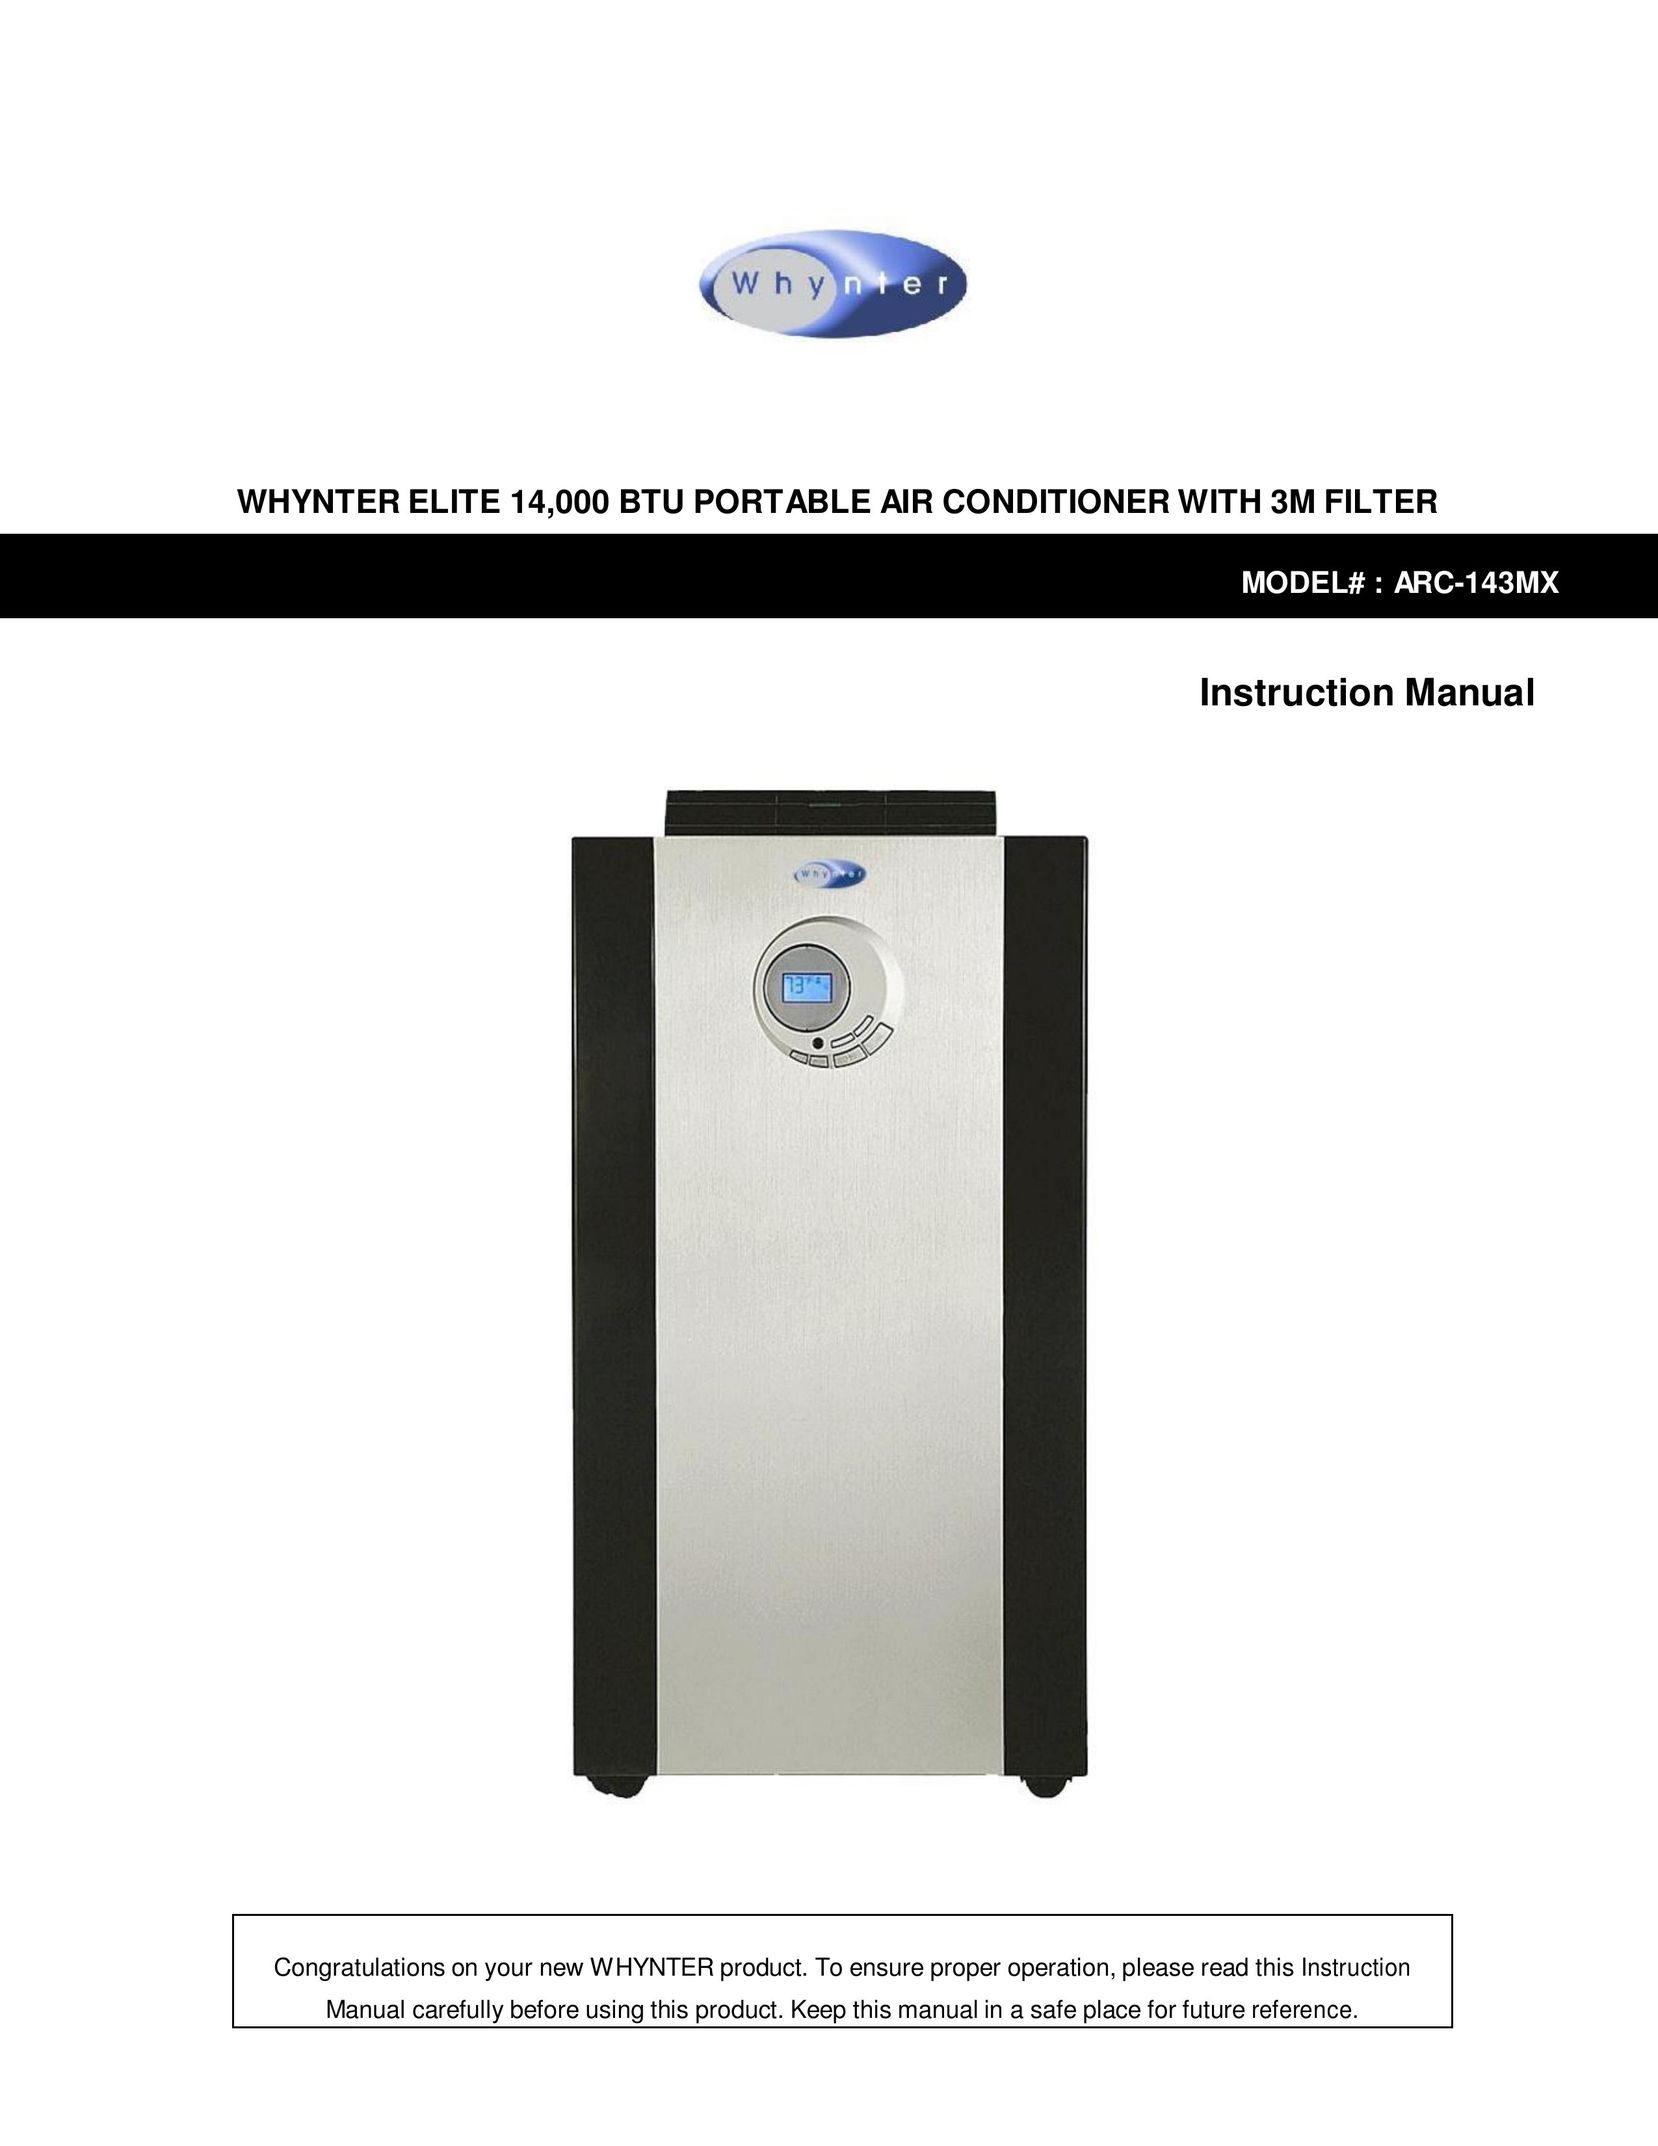 Whynter ARC-143MX Air Conditioner User Manual